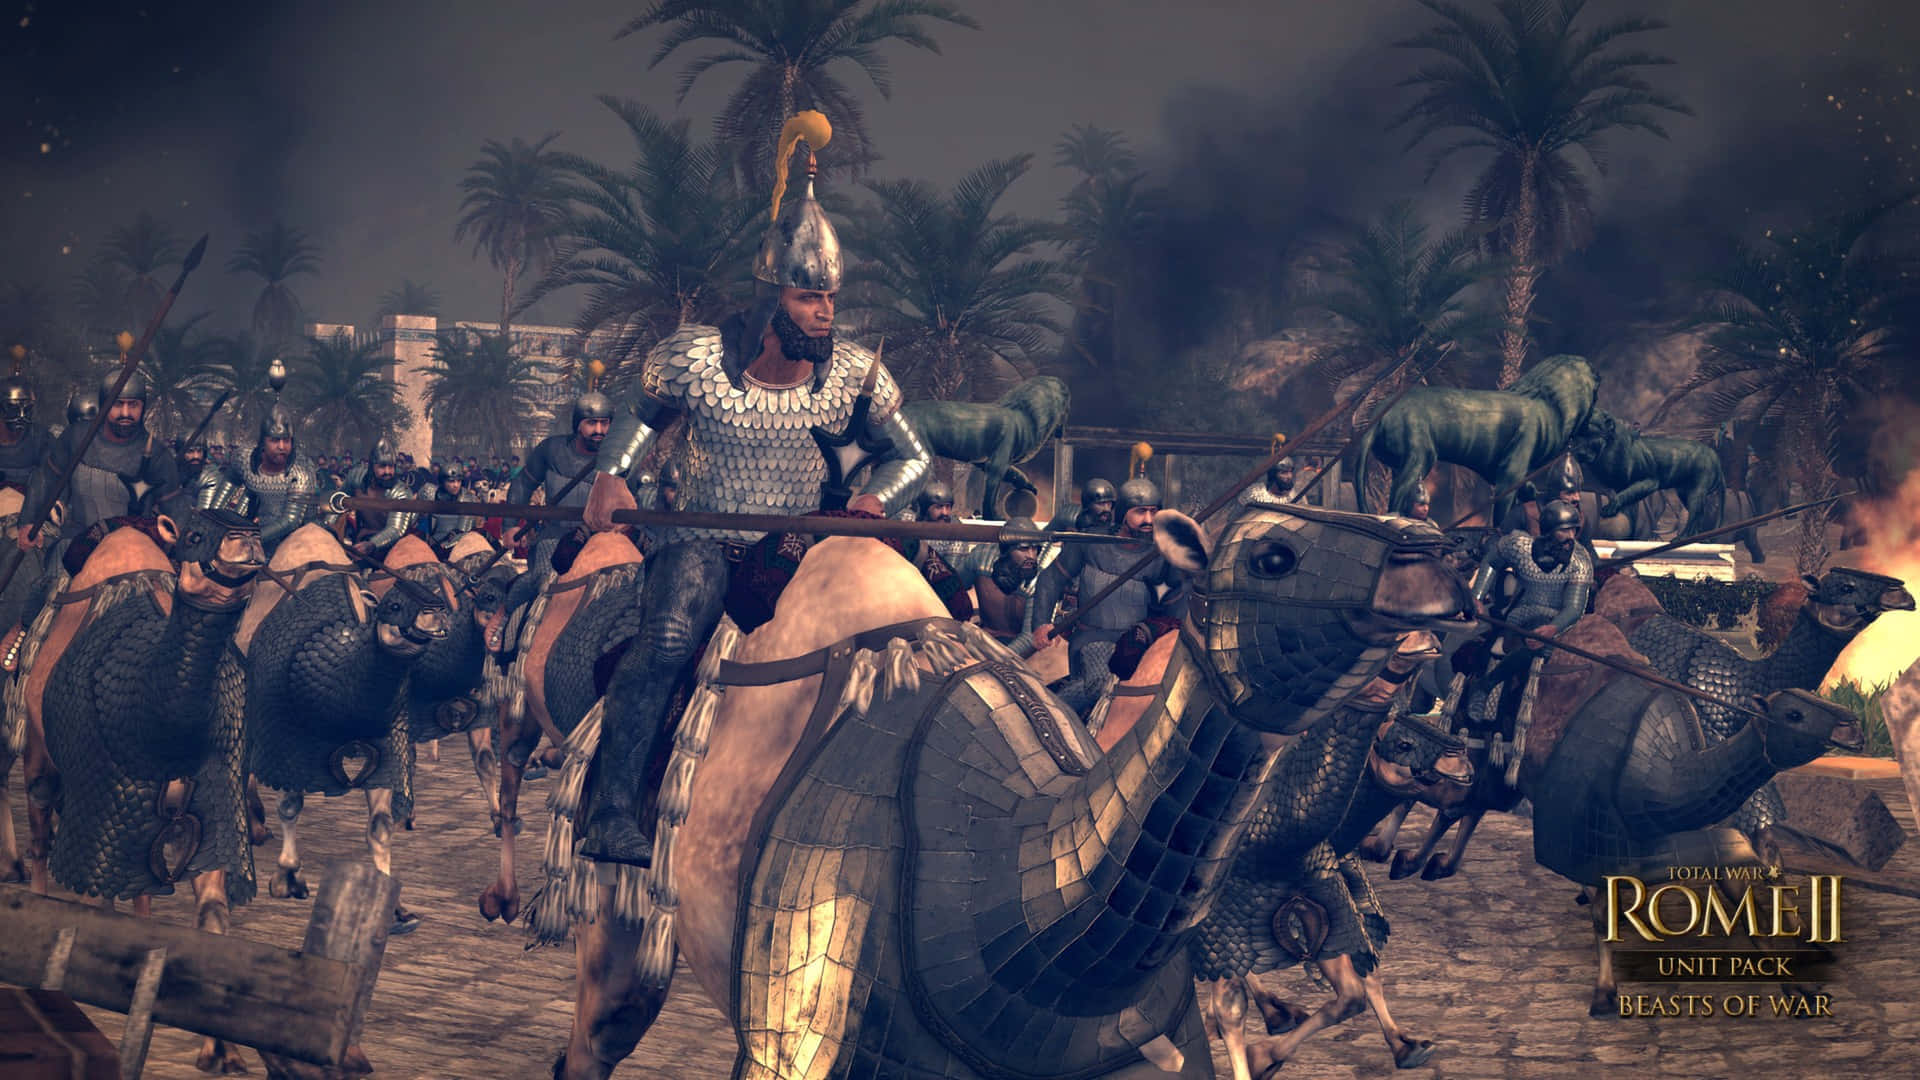 Experience Chariot Warfare in Total War: Rome